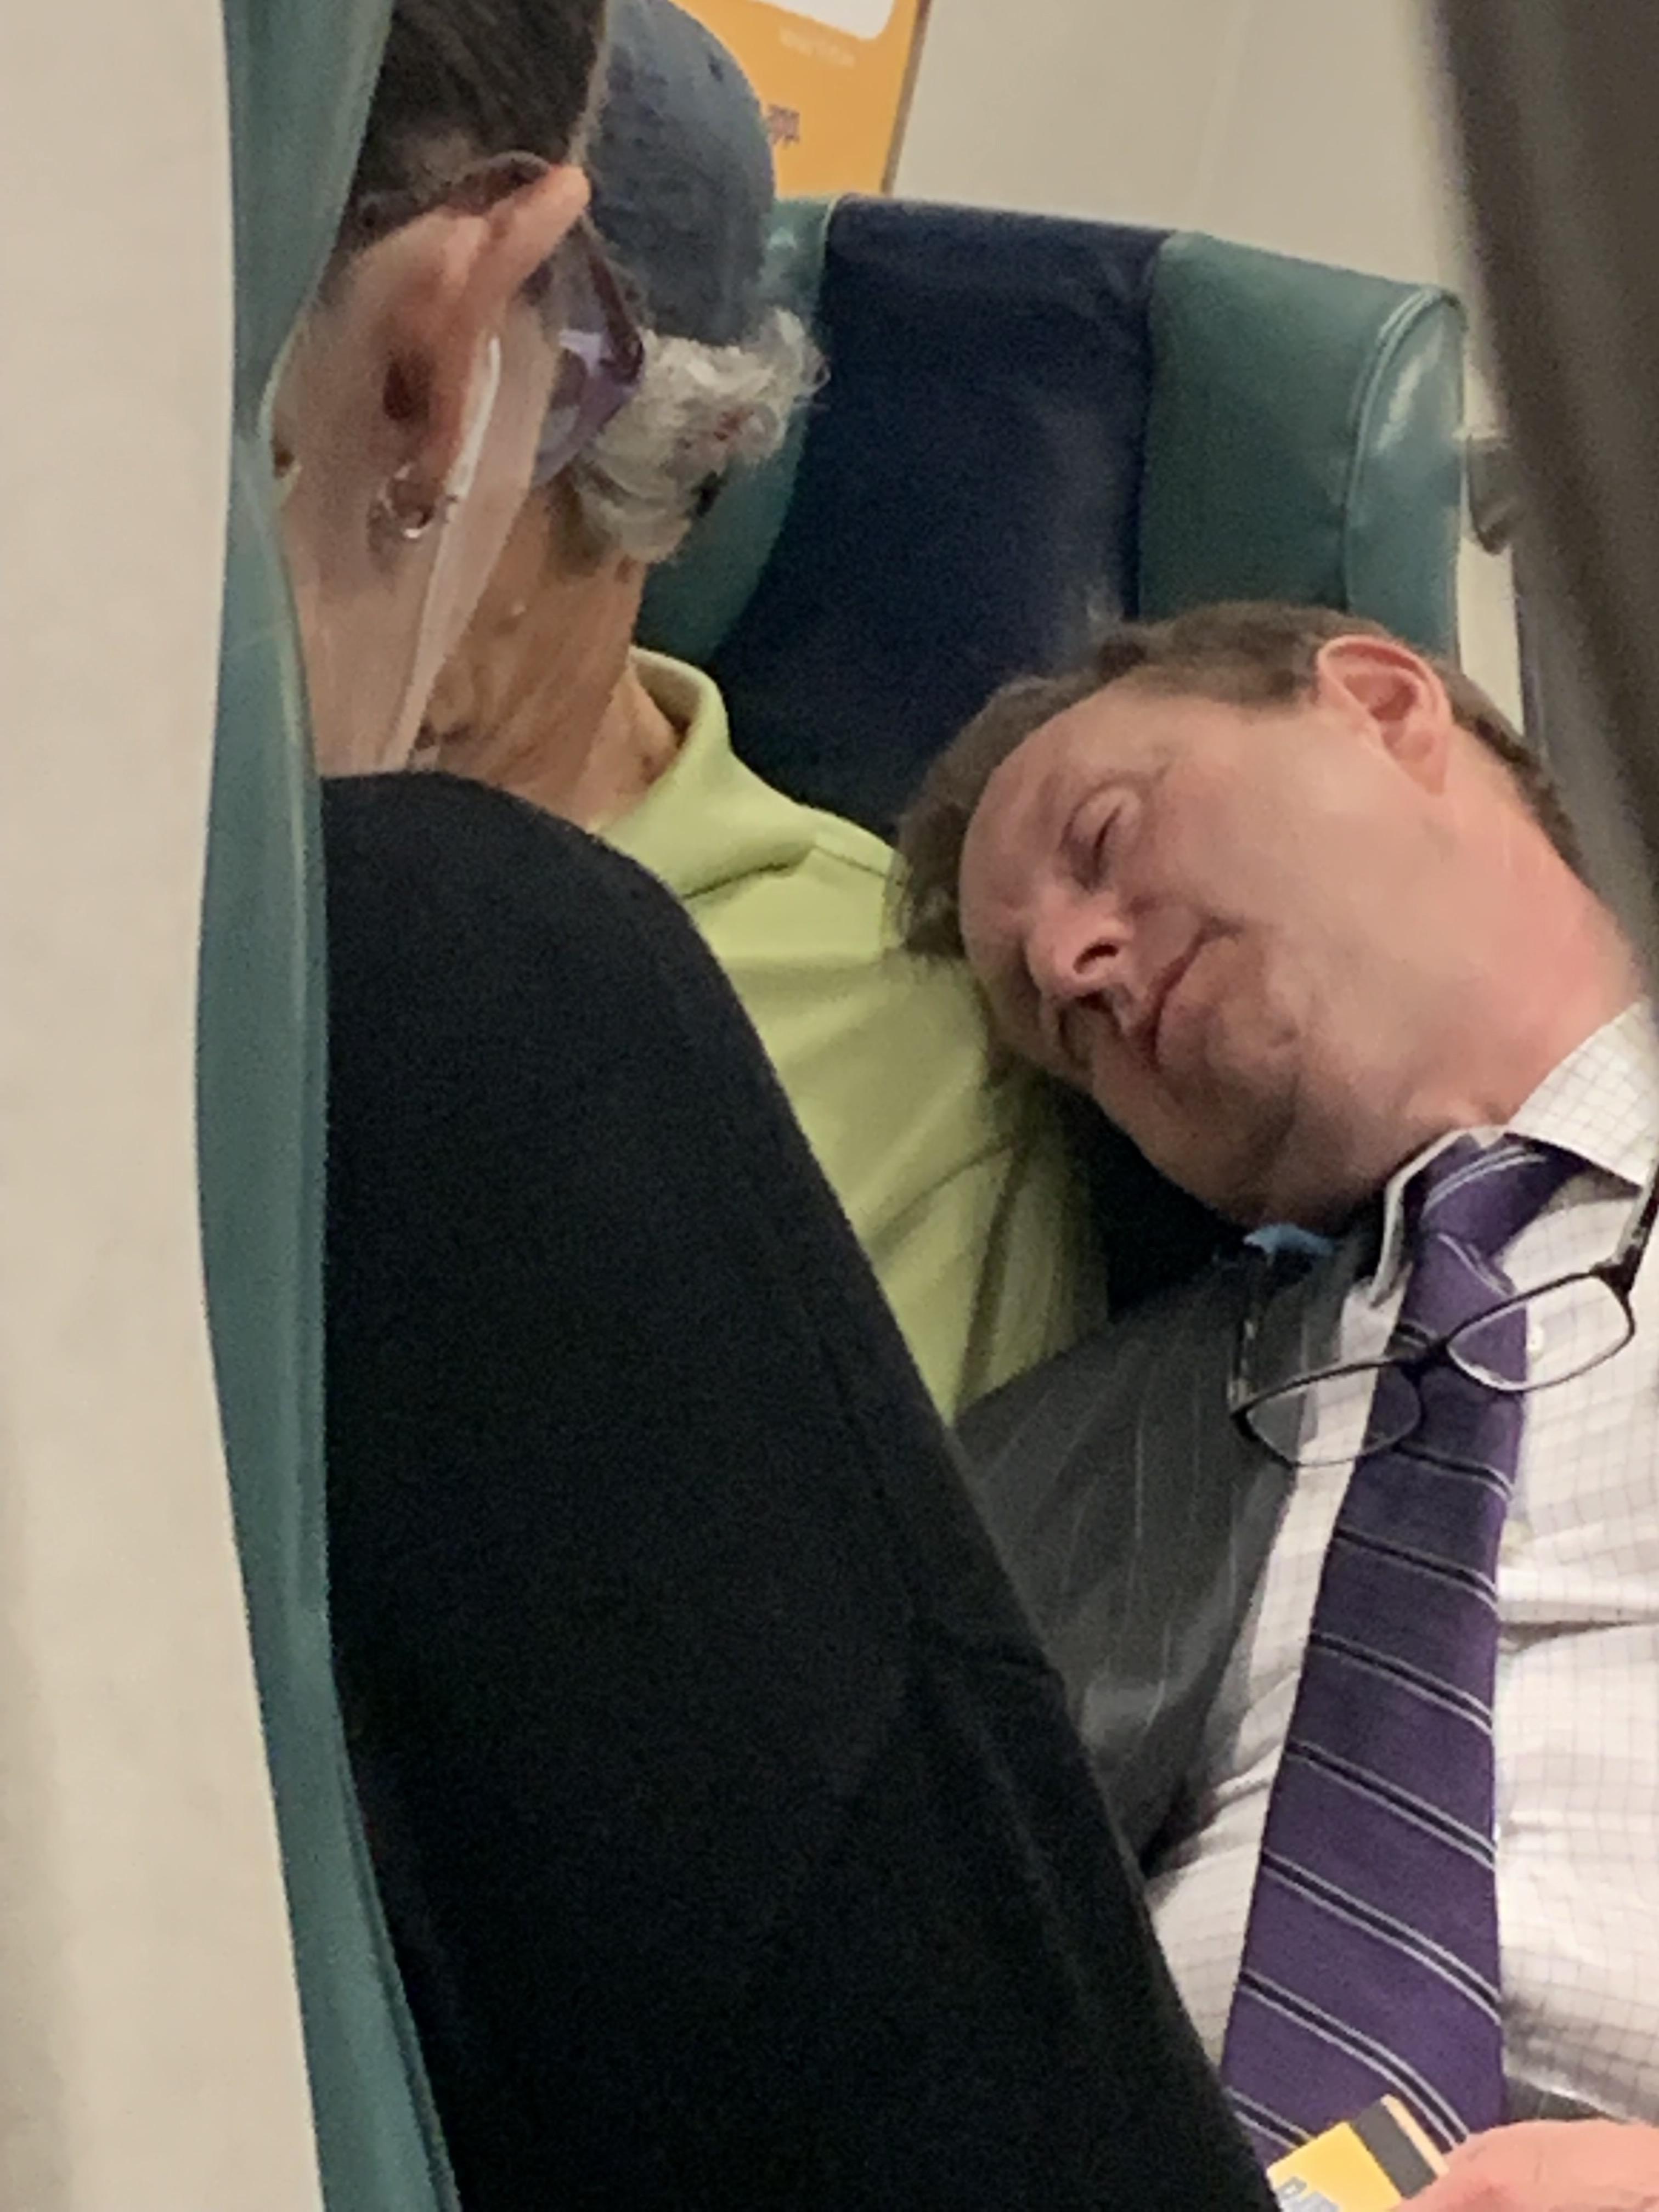 A decent guy let an exhausted business man sleep on him during his commute.